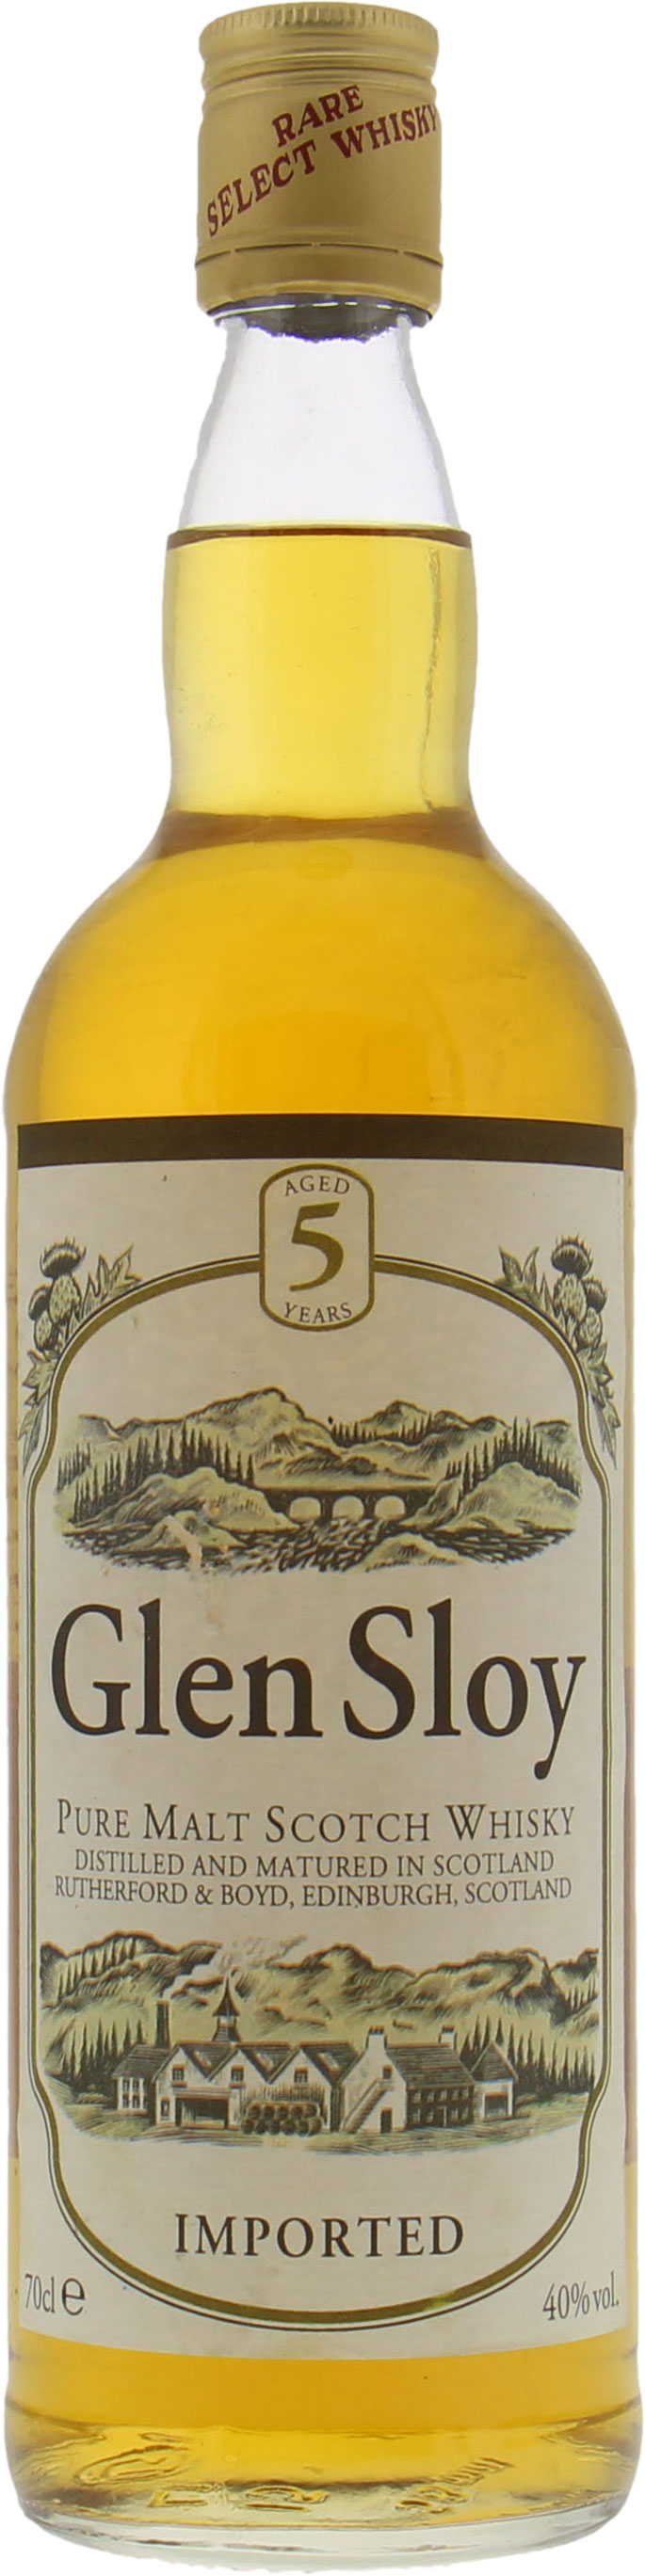 Glen Sloy - 5 Years Old Pure Malt Scotch Whisky 40% NV NO Original Container Included